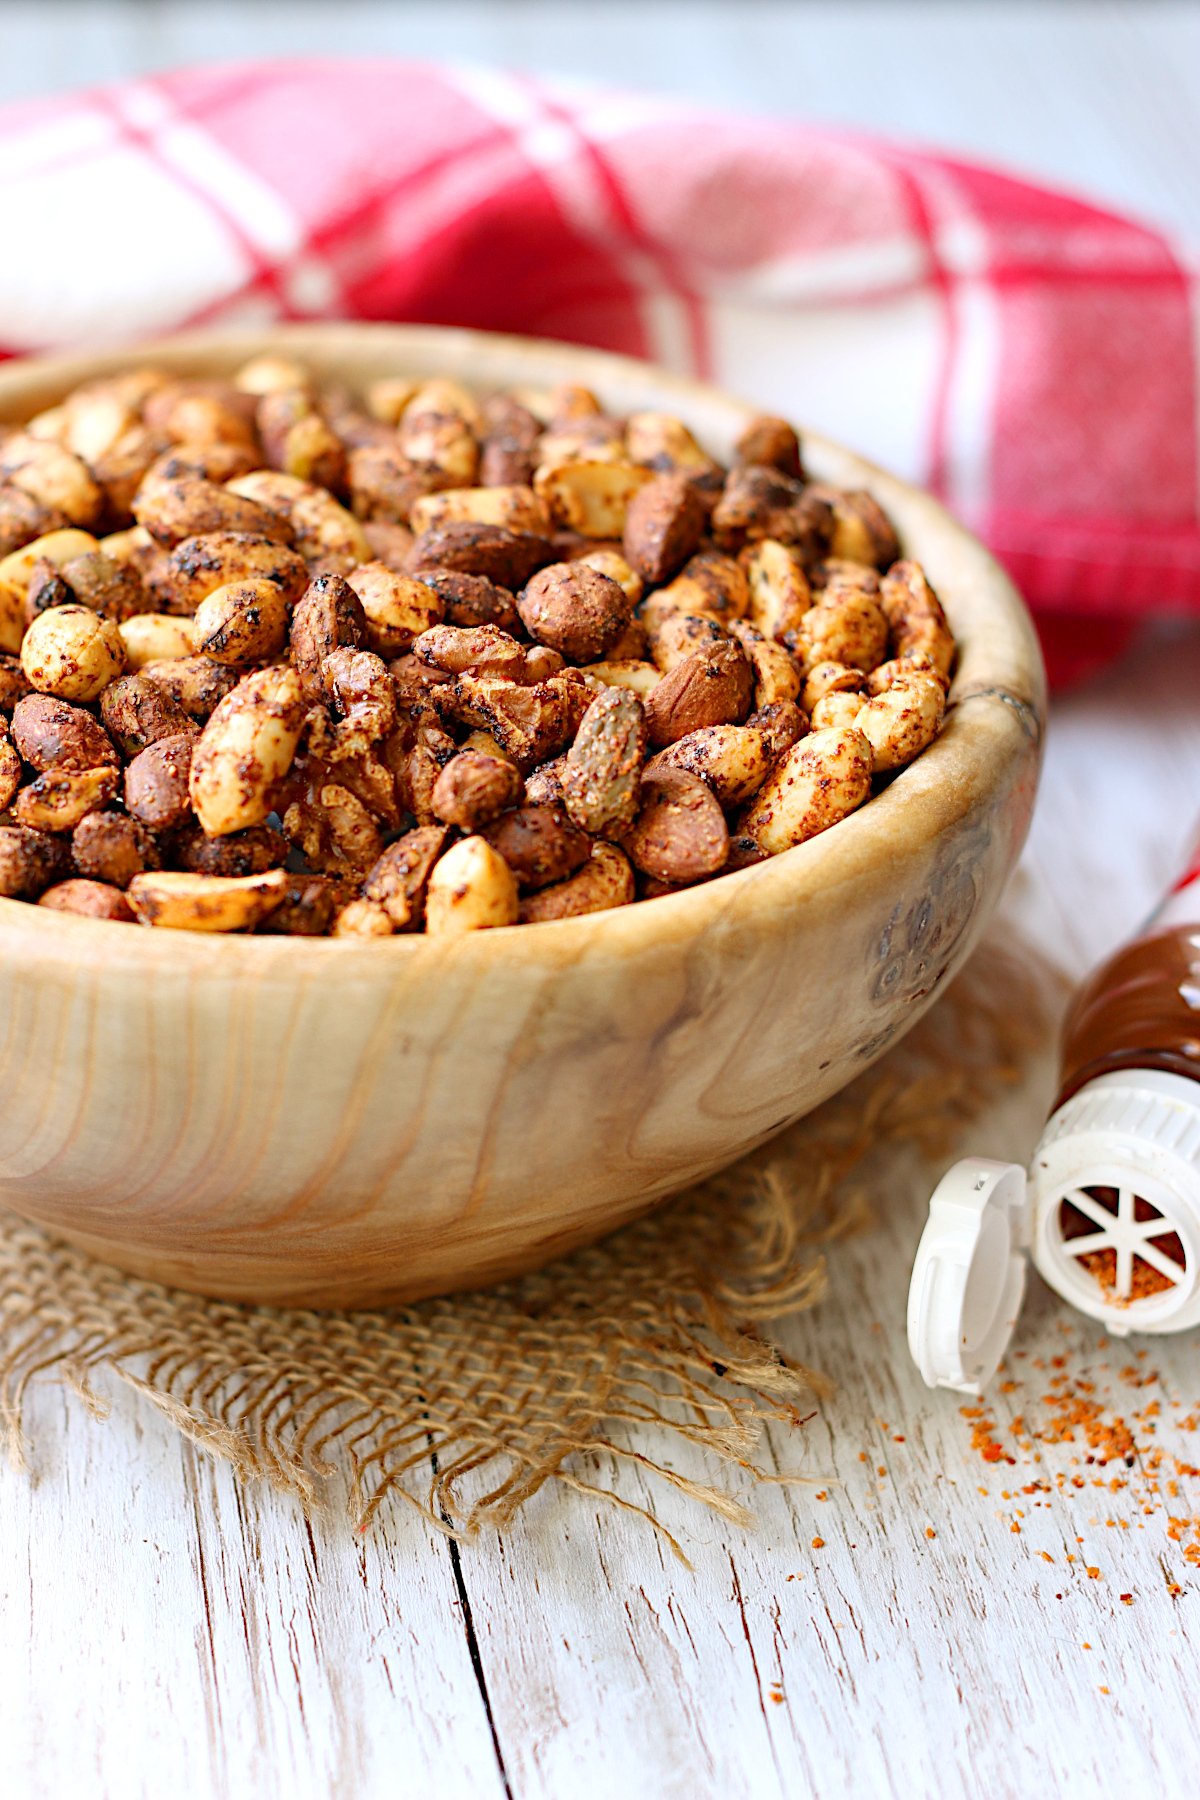 Roasted Chile Lime Nuts in a wood bowl.